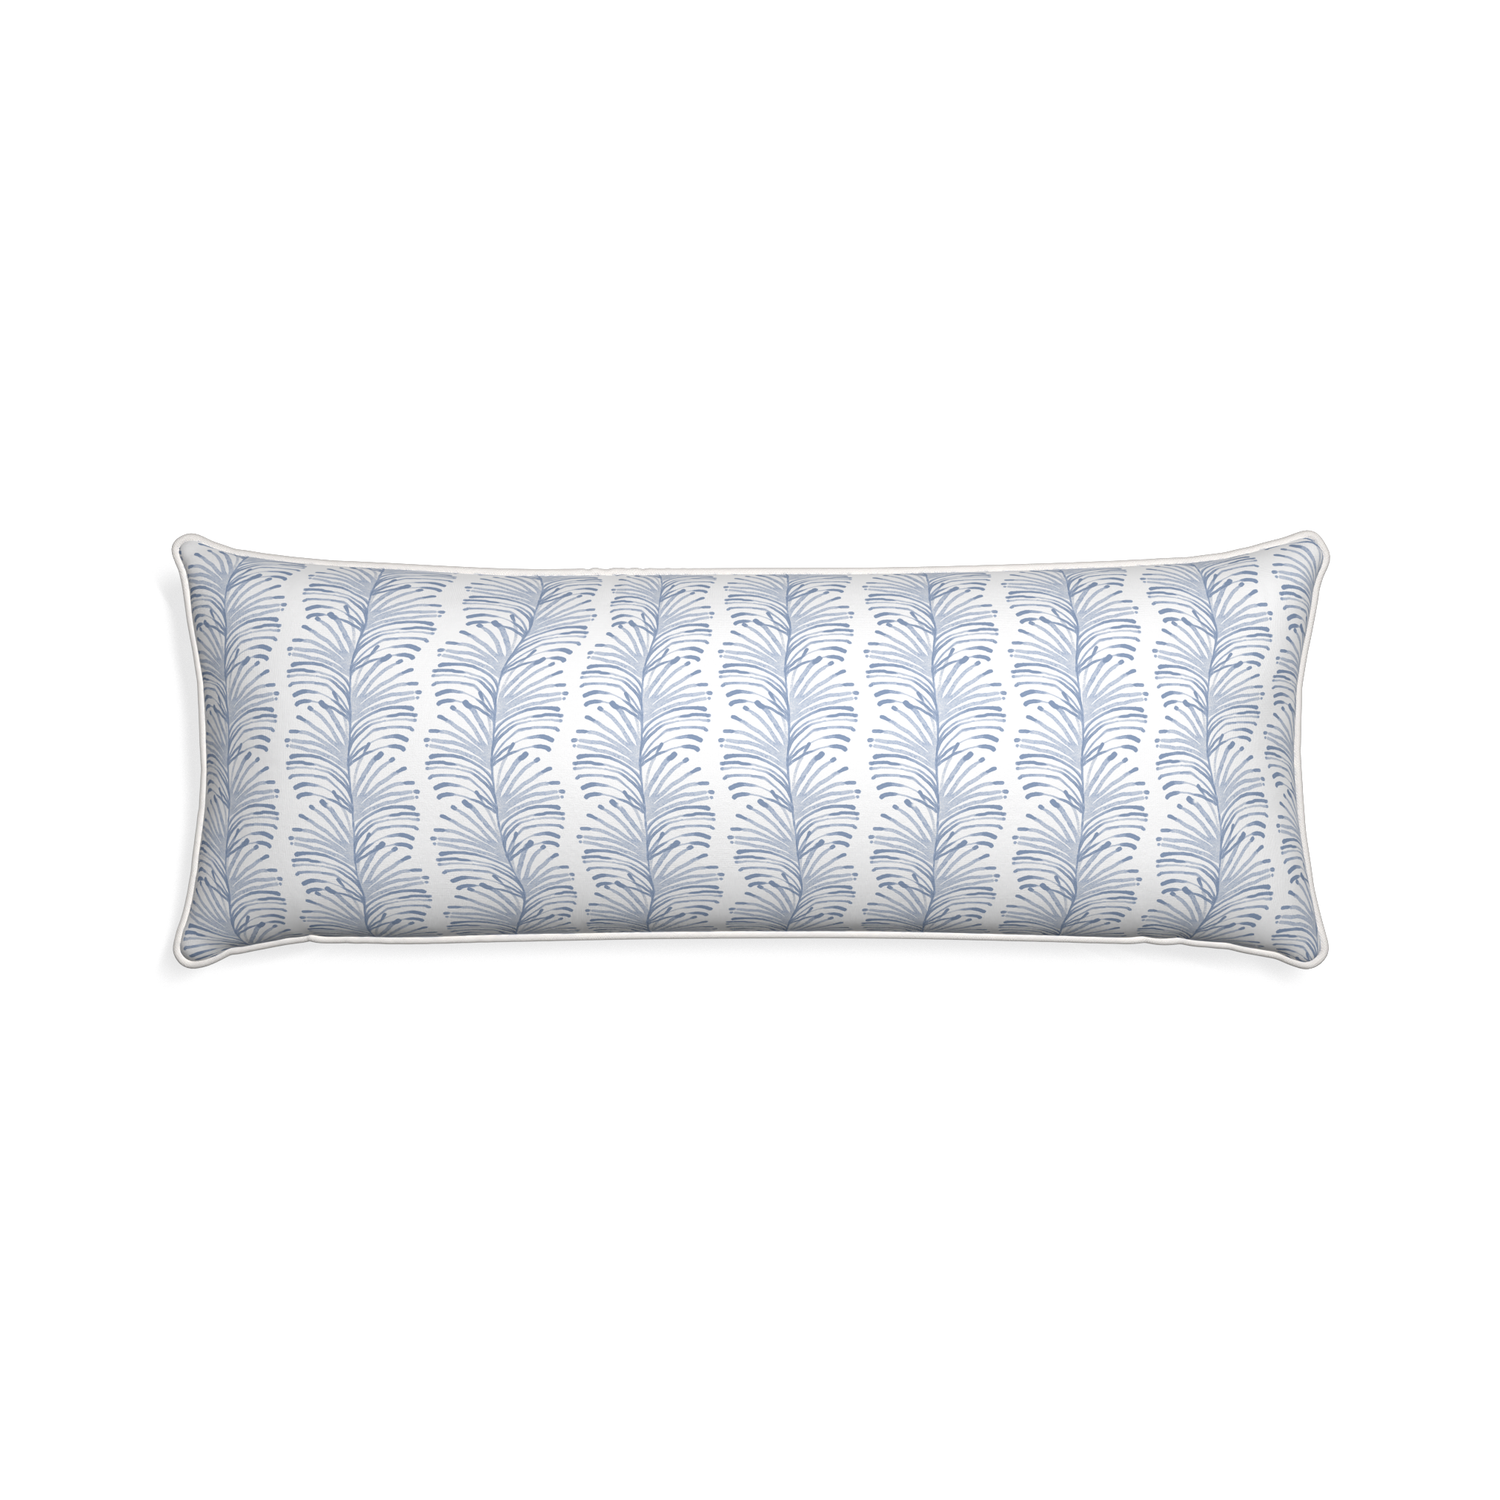 Xl-lumbar emma sky custom pillow with snow piping on white background